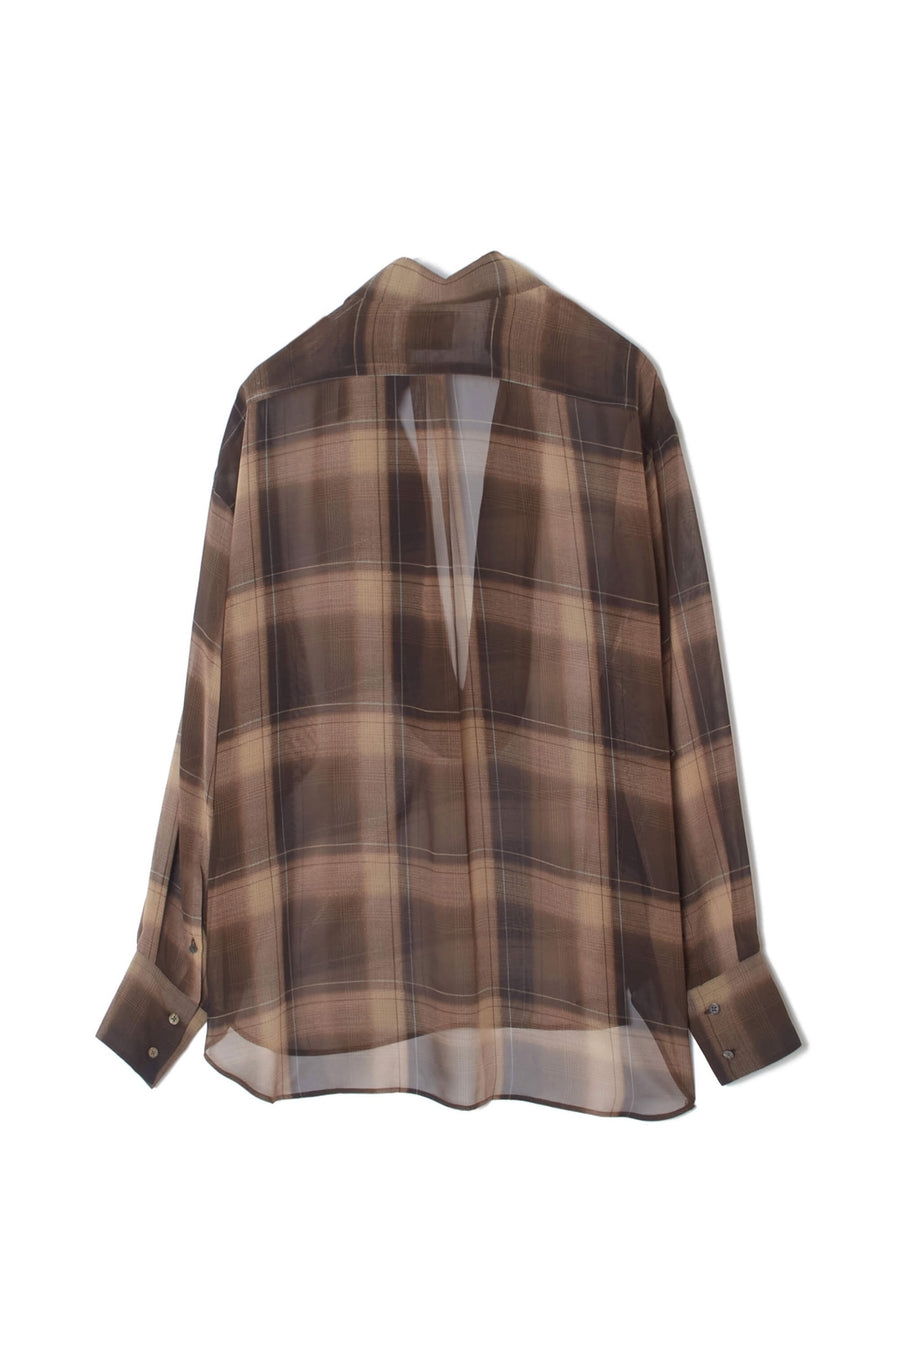 SUGARHILL  SHEER OMBRE BLOUSE(BROWN CAMEL)